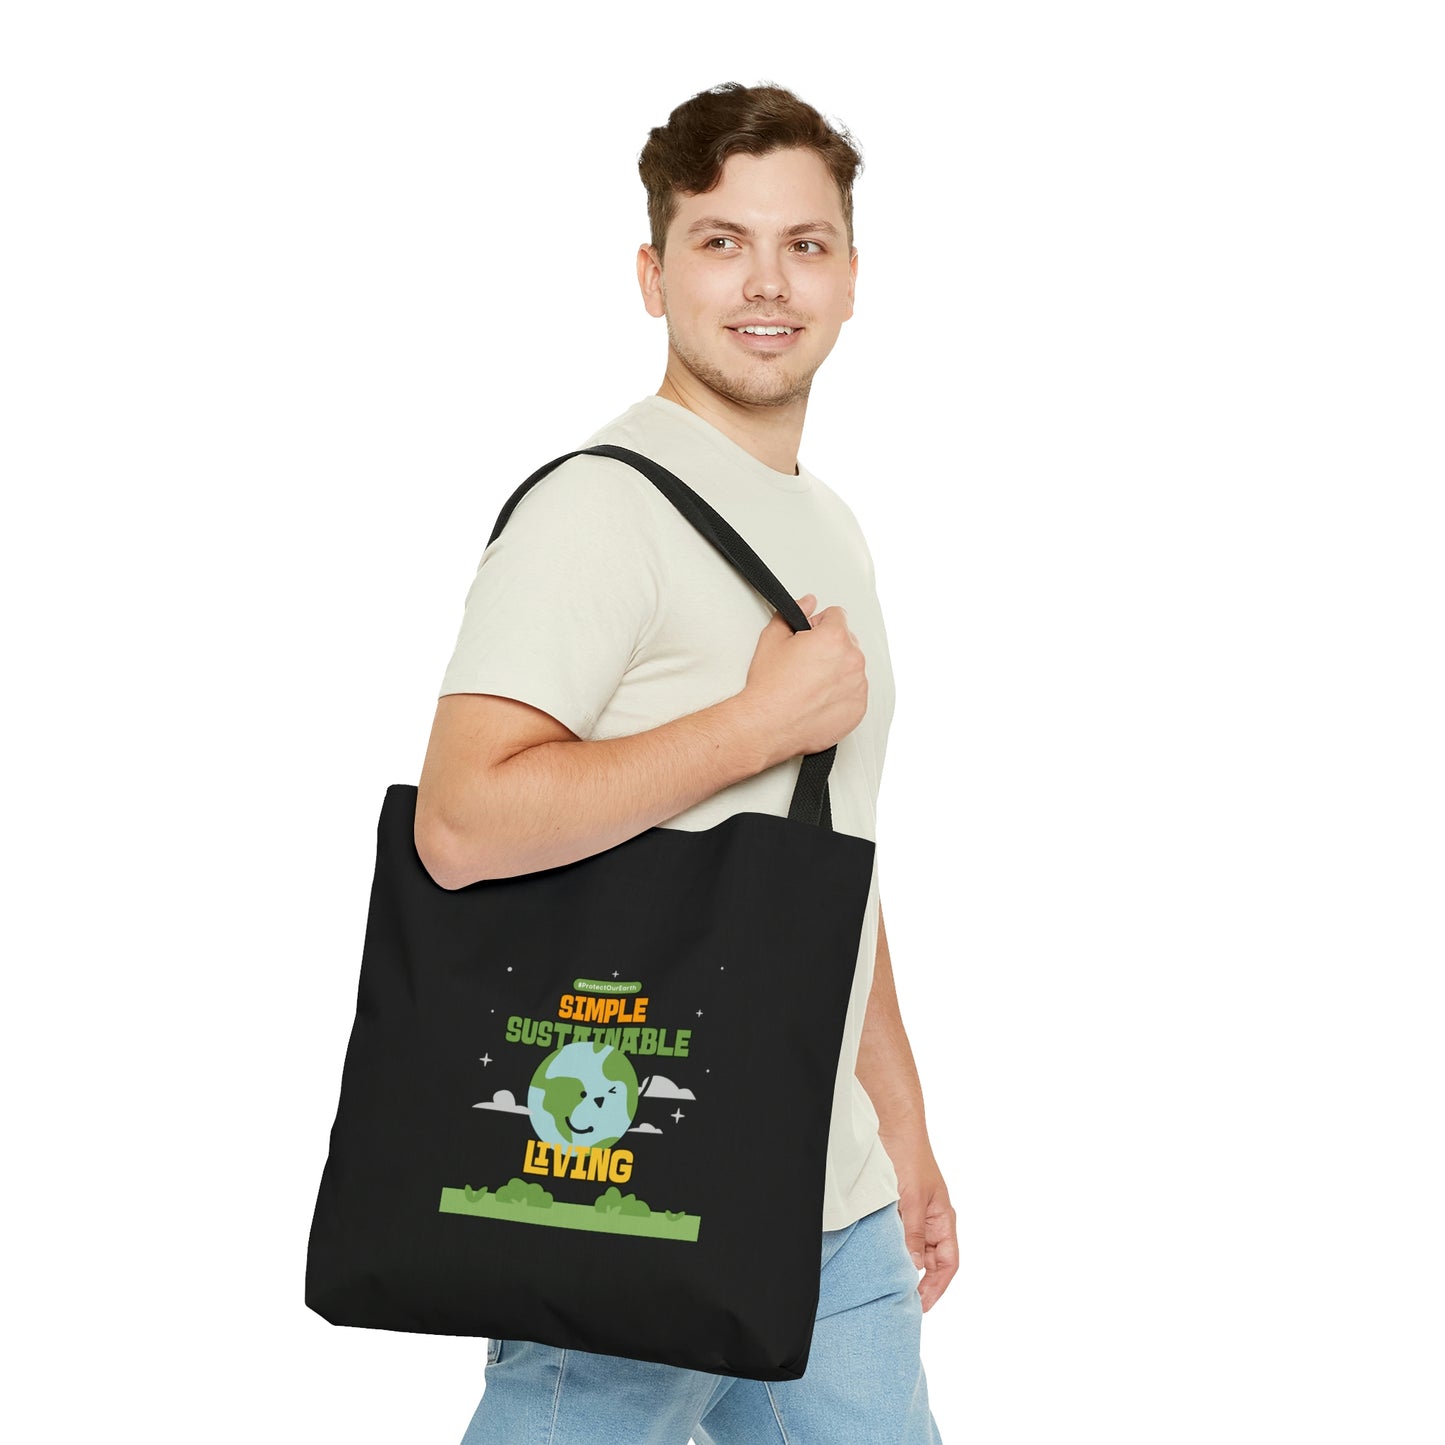 Mock up of a man carrying the medium tote bag